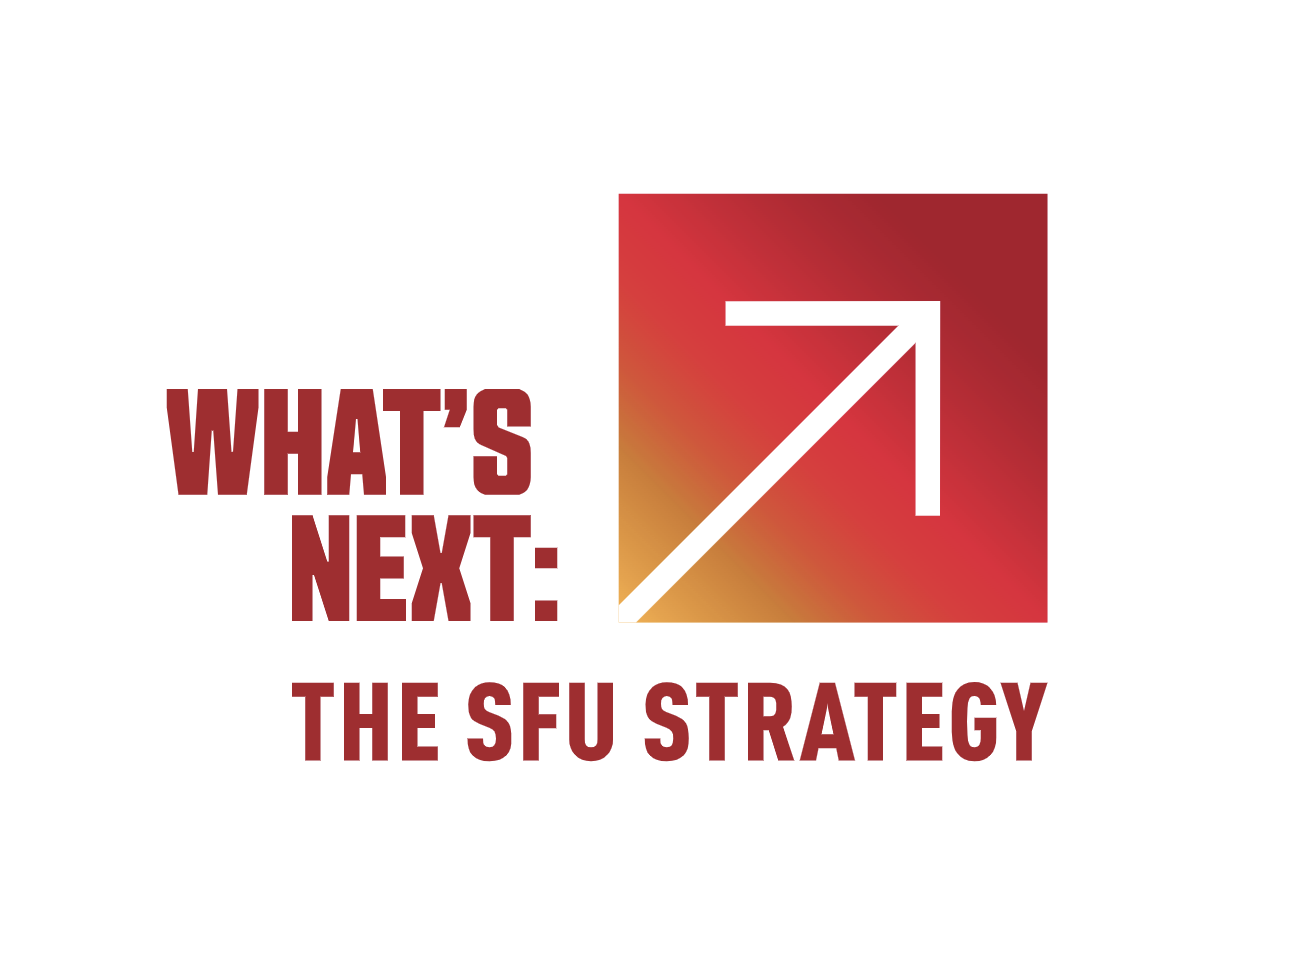 What's Next: The SFU Strategy